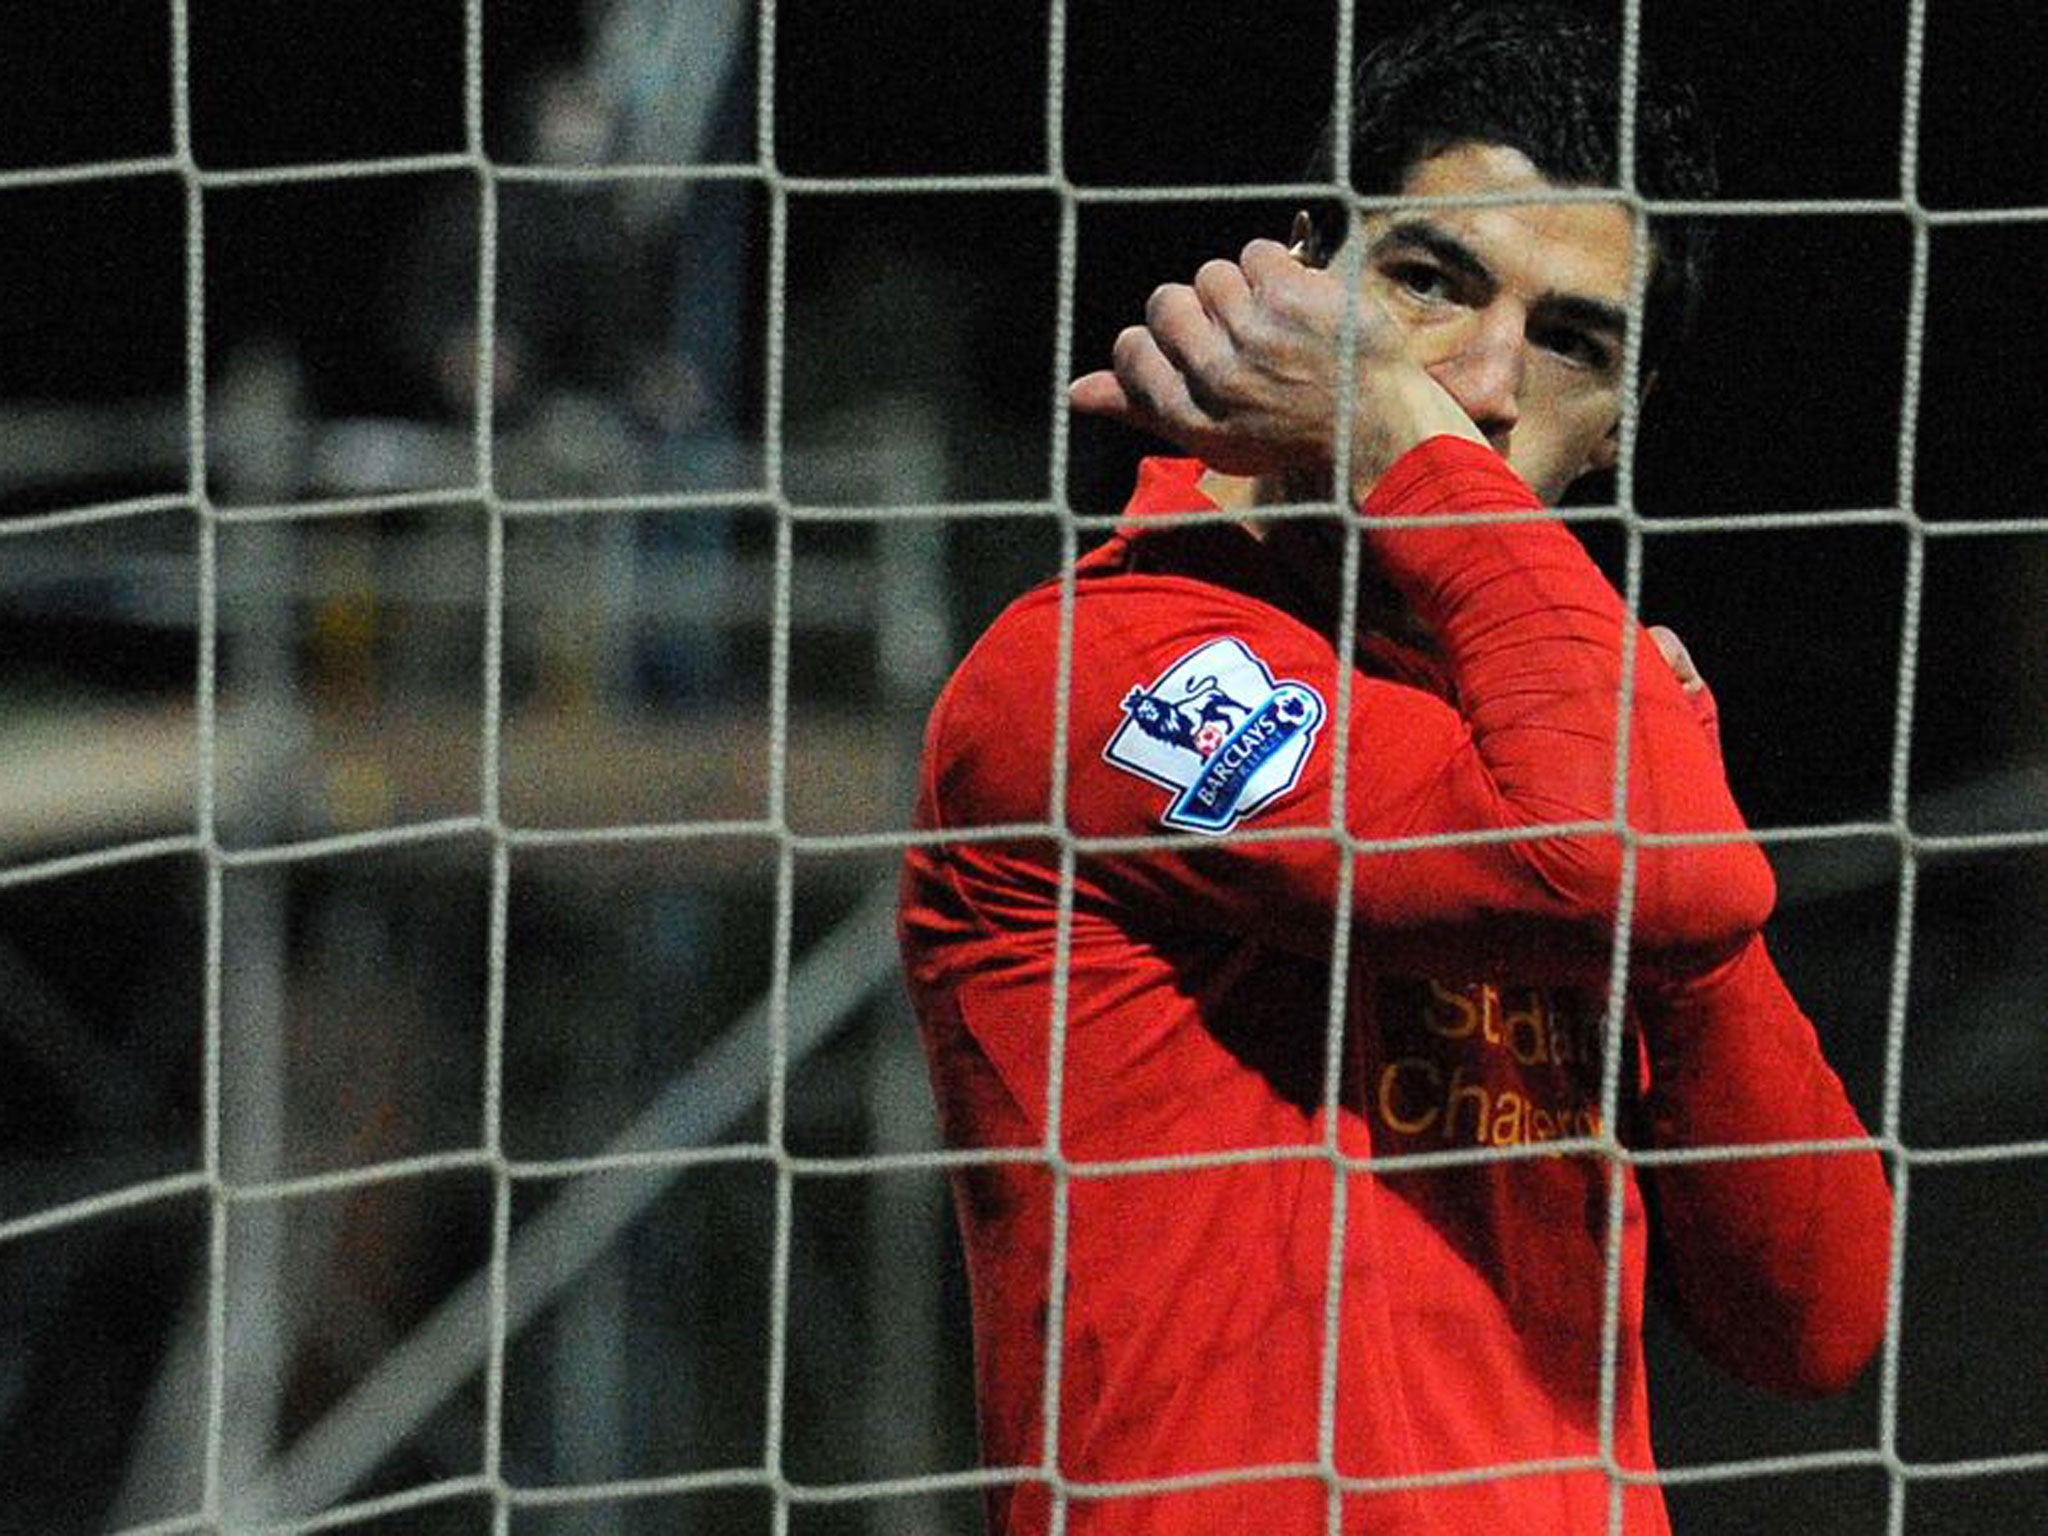 Suarez confirmed his status as the most brilliant but troubling enigma